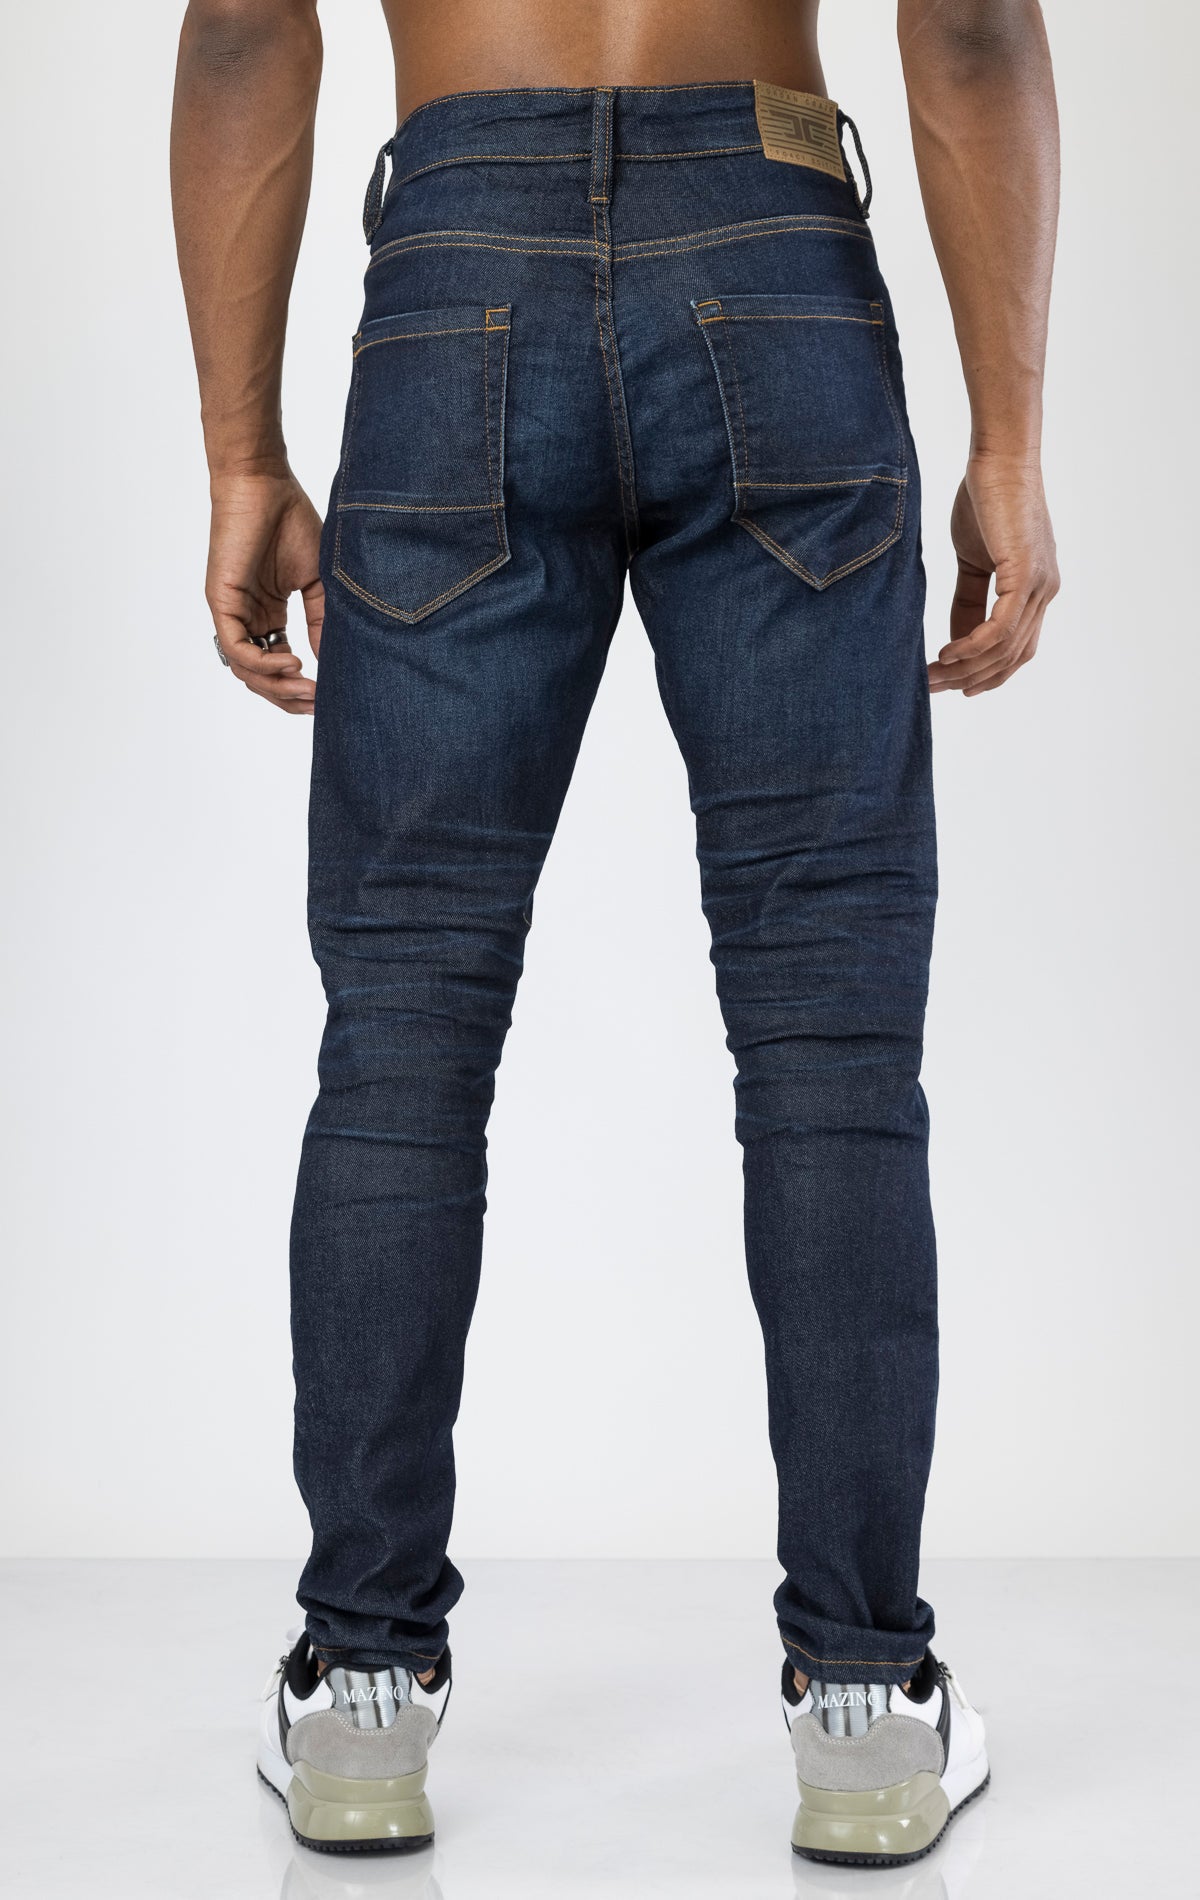 Men's Sean Slim Taper jeans in dark indigo. The jeans feature a regular rise waist, a comfortable fit from waist to thigh, a slim taper from knee to ankle, 3D baked wrinkles for texture, a raw denim look, and are made from a super stretch fabric blend (35% Cotton, 30% Polyester, 34% Tencel and 1% Elastane).